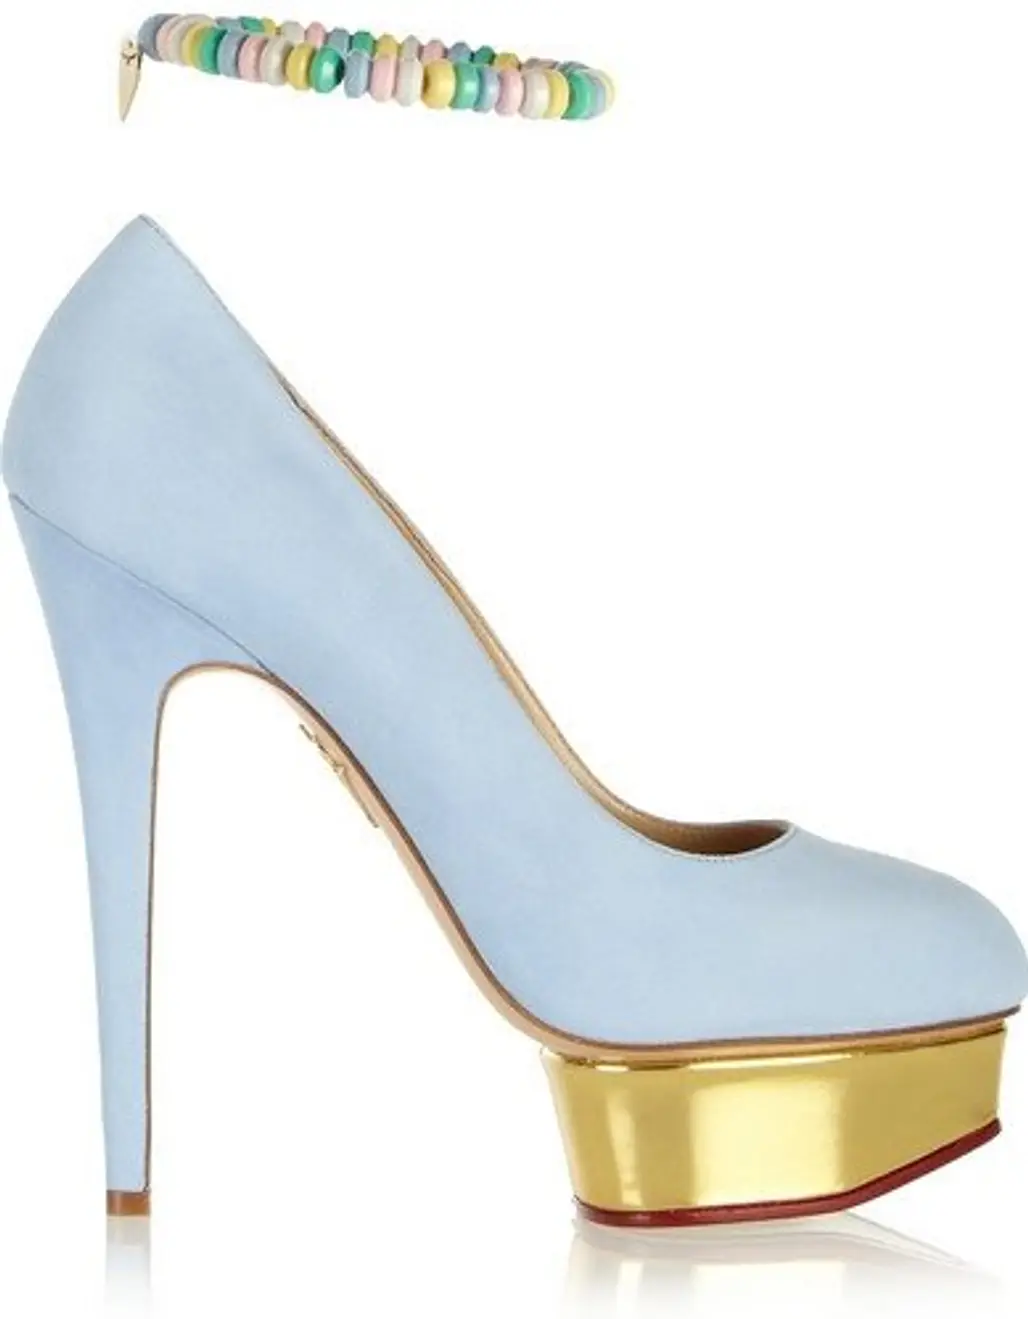 Charlotte Olympia Sweet Dolly Suede Pumps